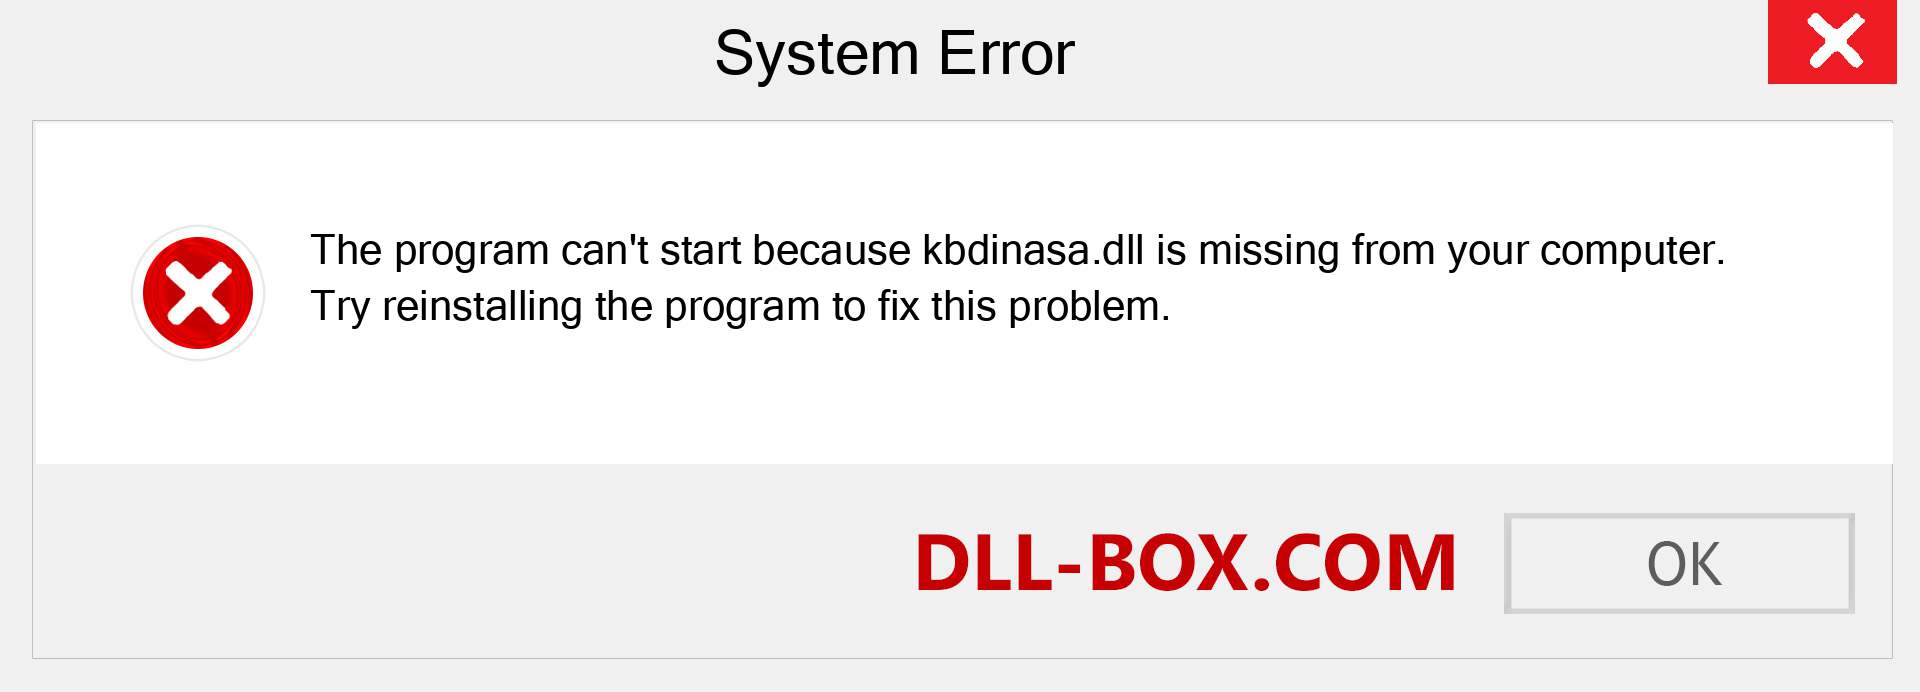  kbdinasa.dll file is missing?. Download for Windows 7, 8, 10 - Fix  kbdinasa dll Missing Error on Windows, photos, images